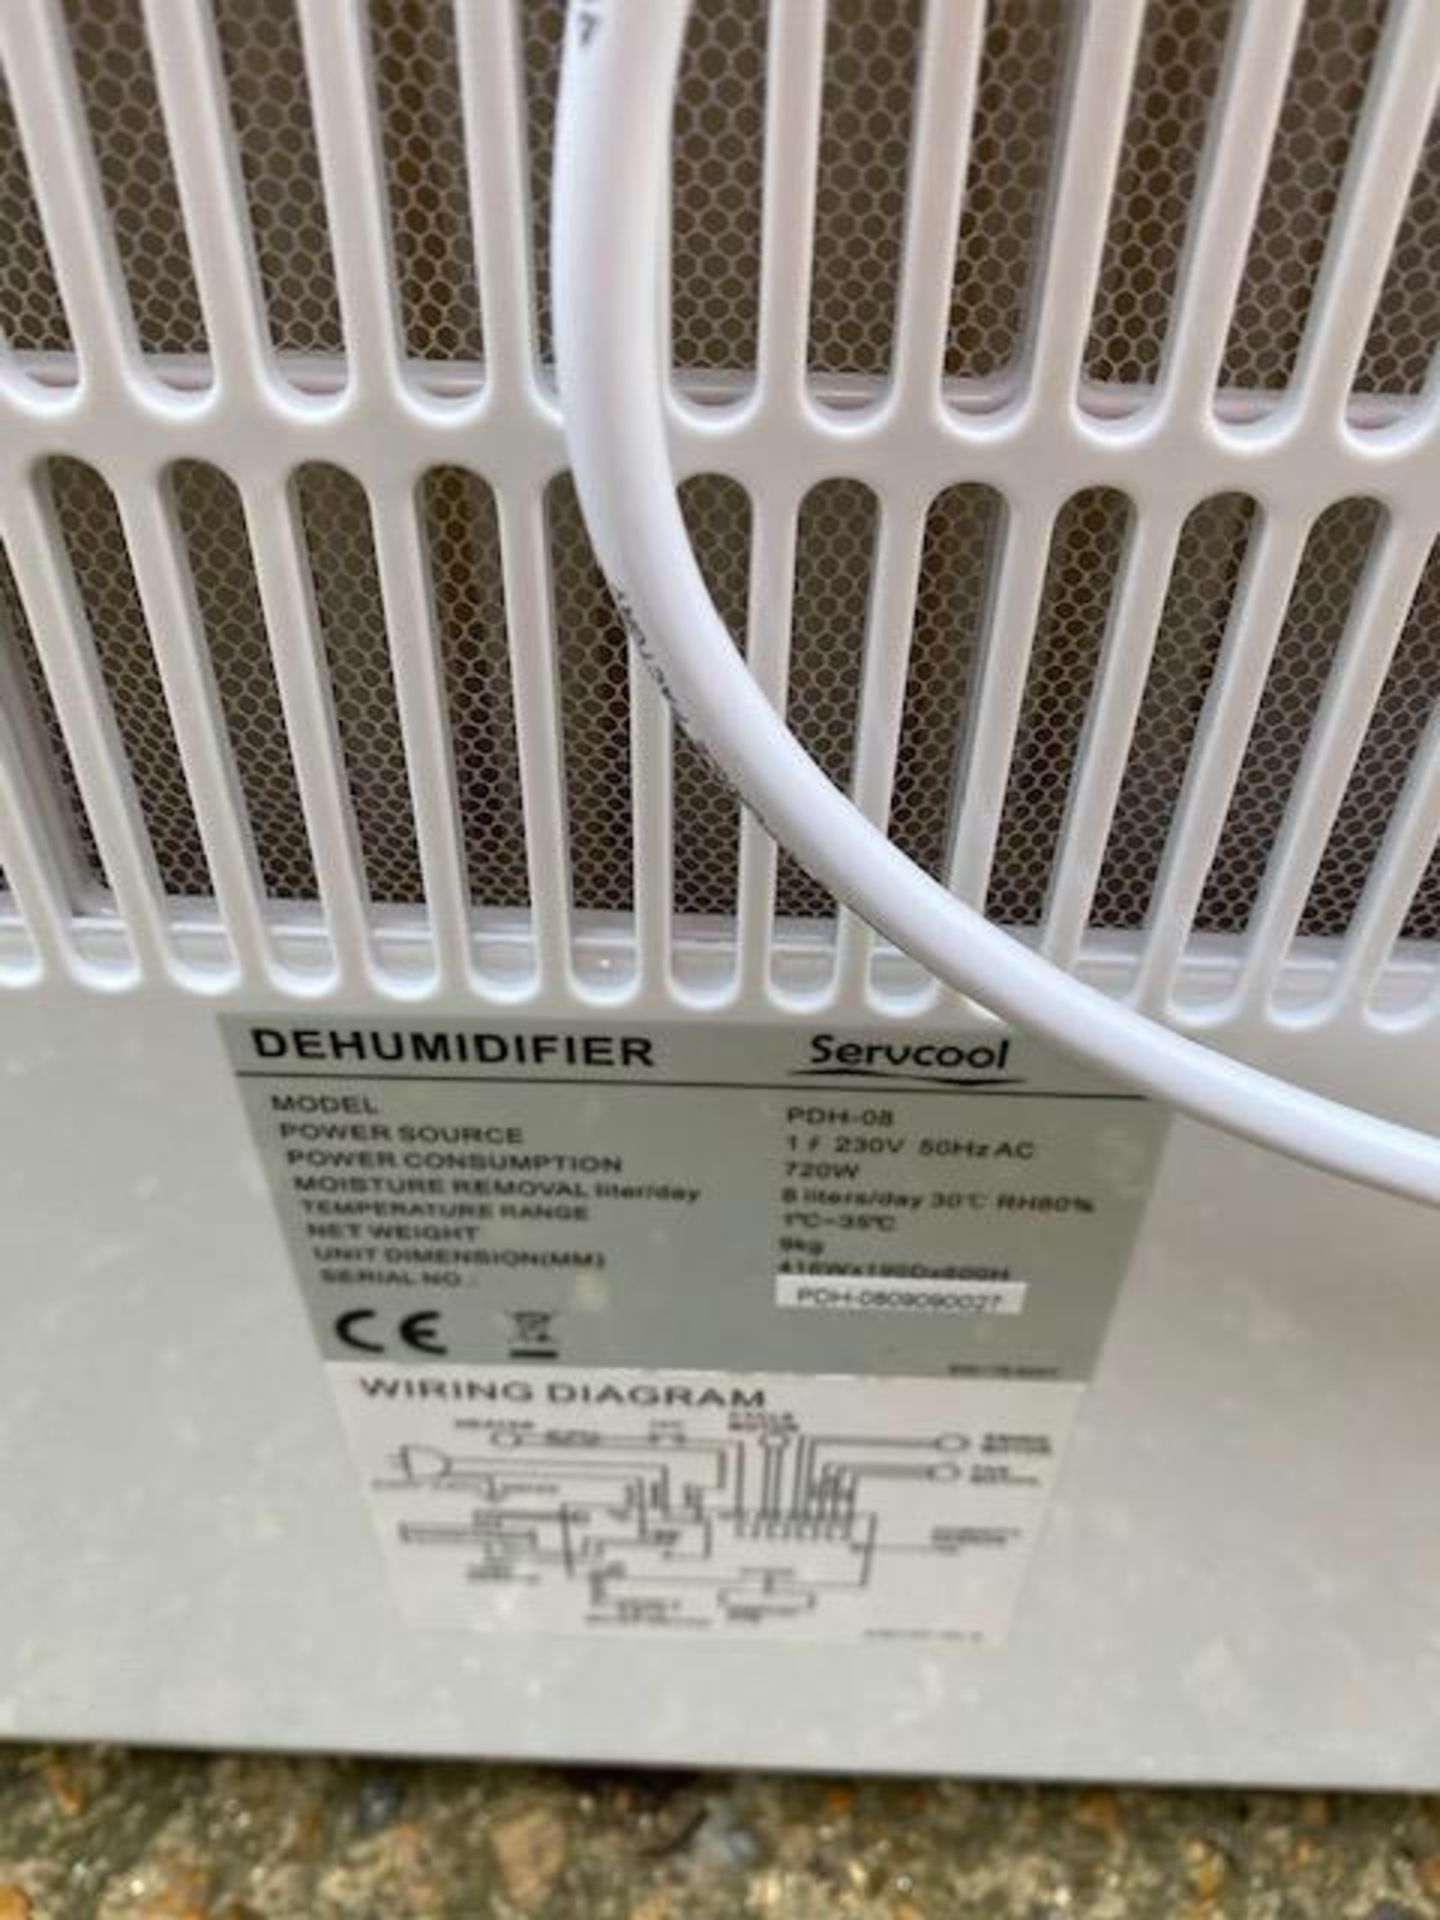 10x Servool PDH-08 Dehumidifiers, 220-240V, 50Hz - Image 4 of 12